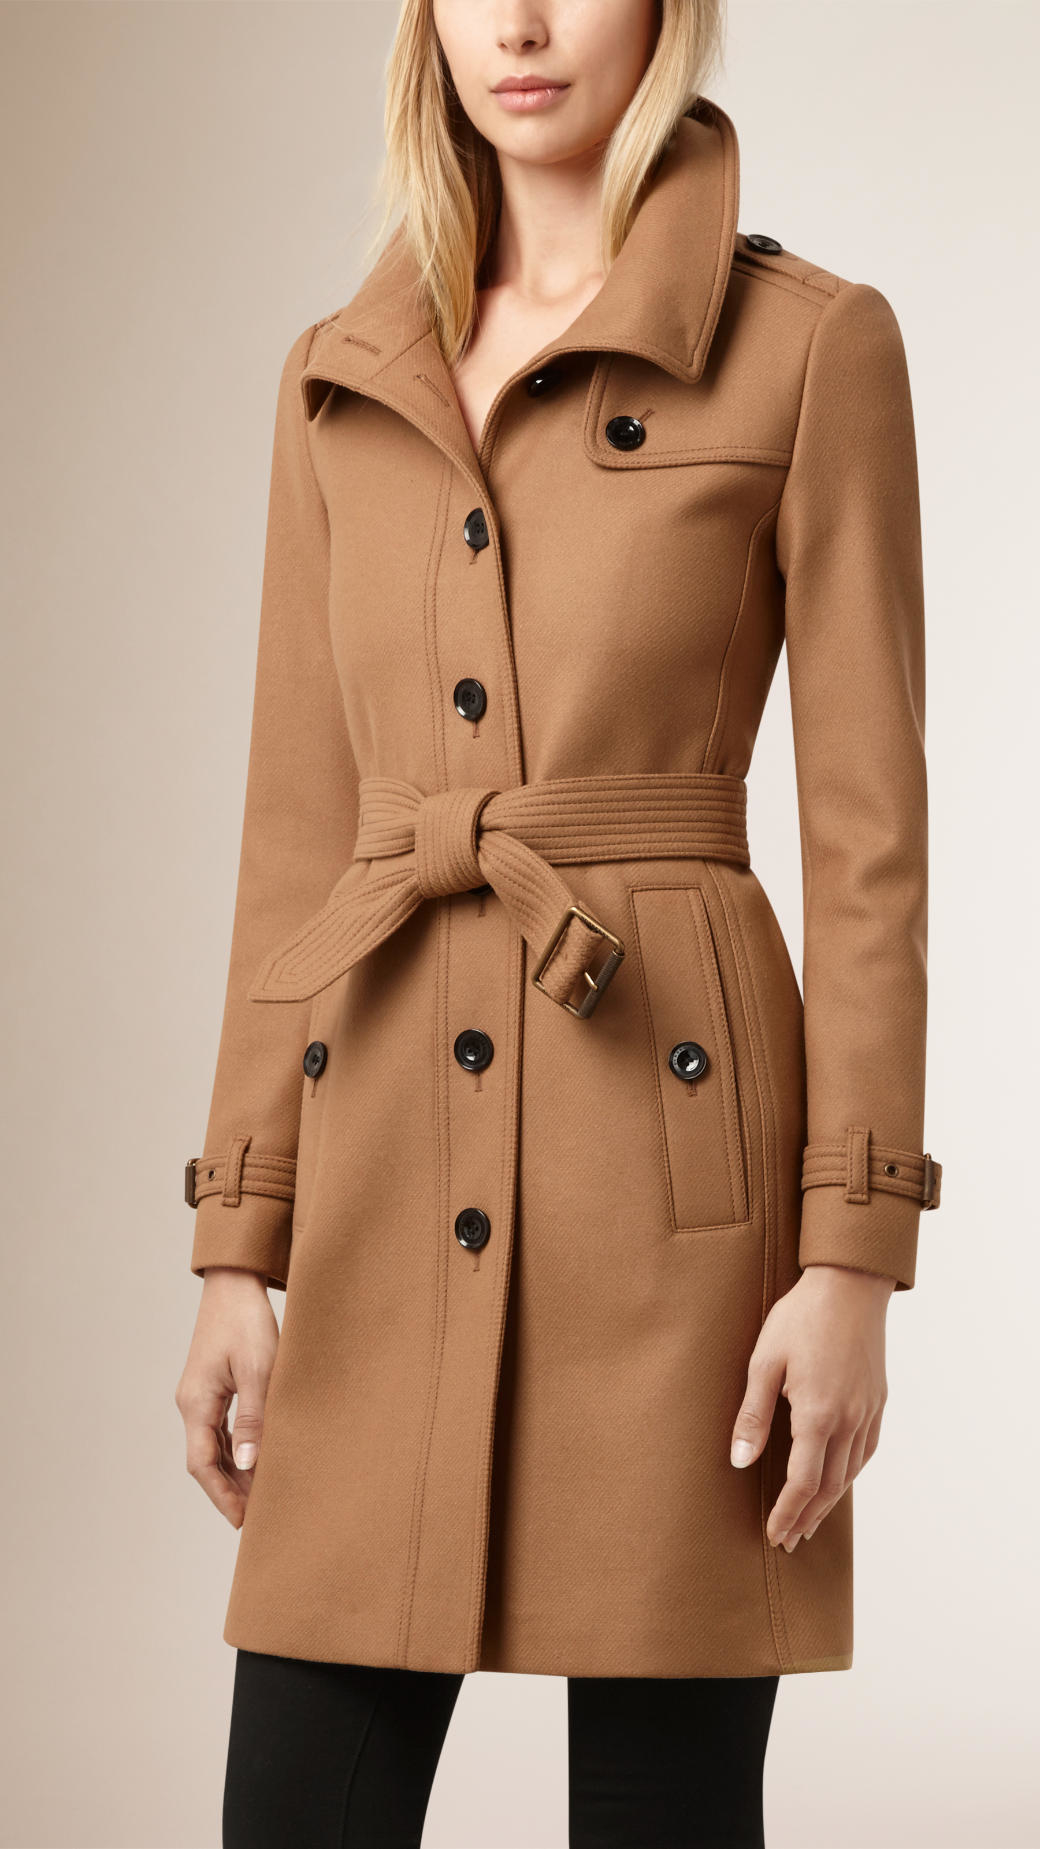 ildsted Nu at lege Burberry Virgin Wool Cashmere Blend Trench Coat in Brown | Lyst